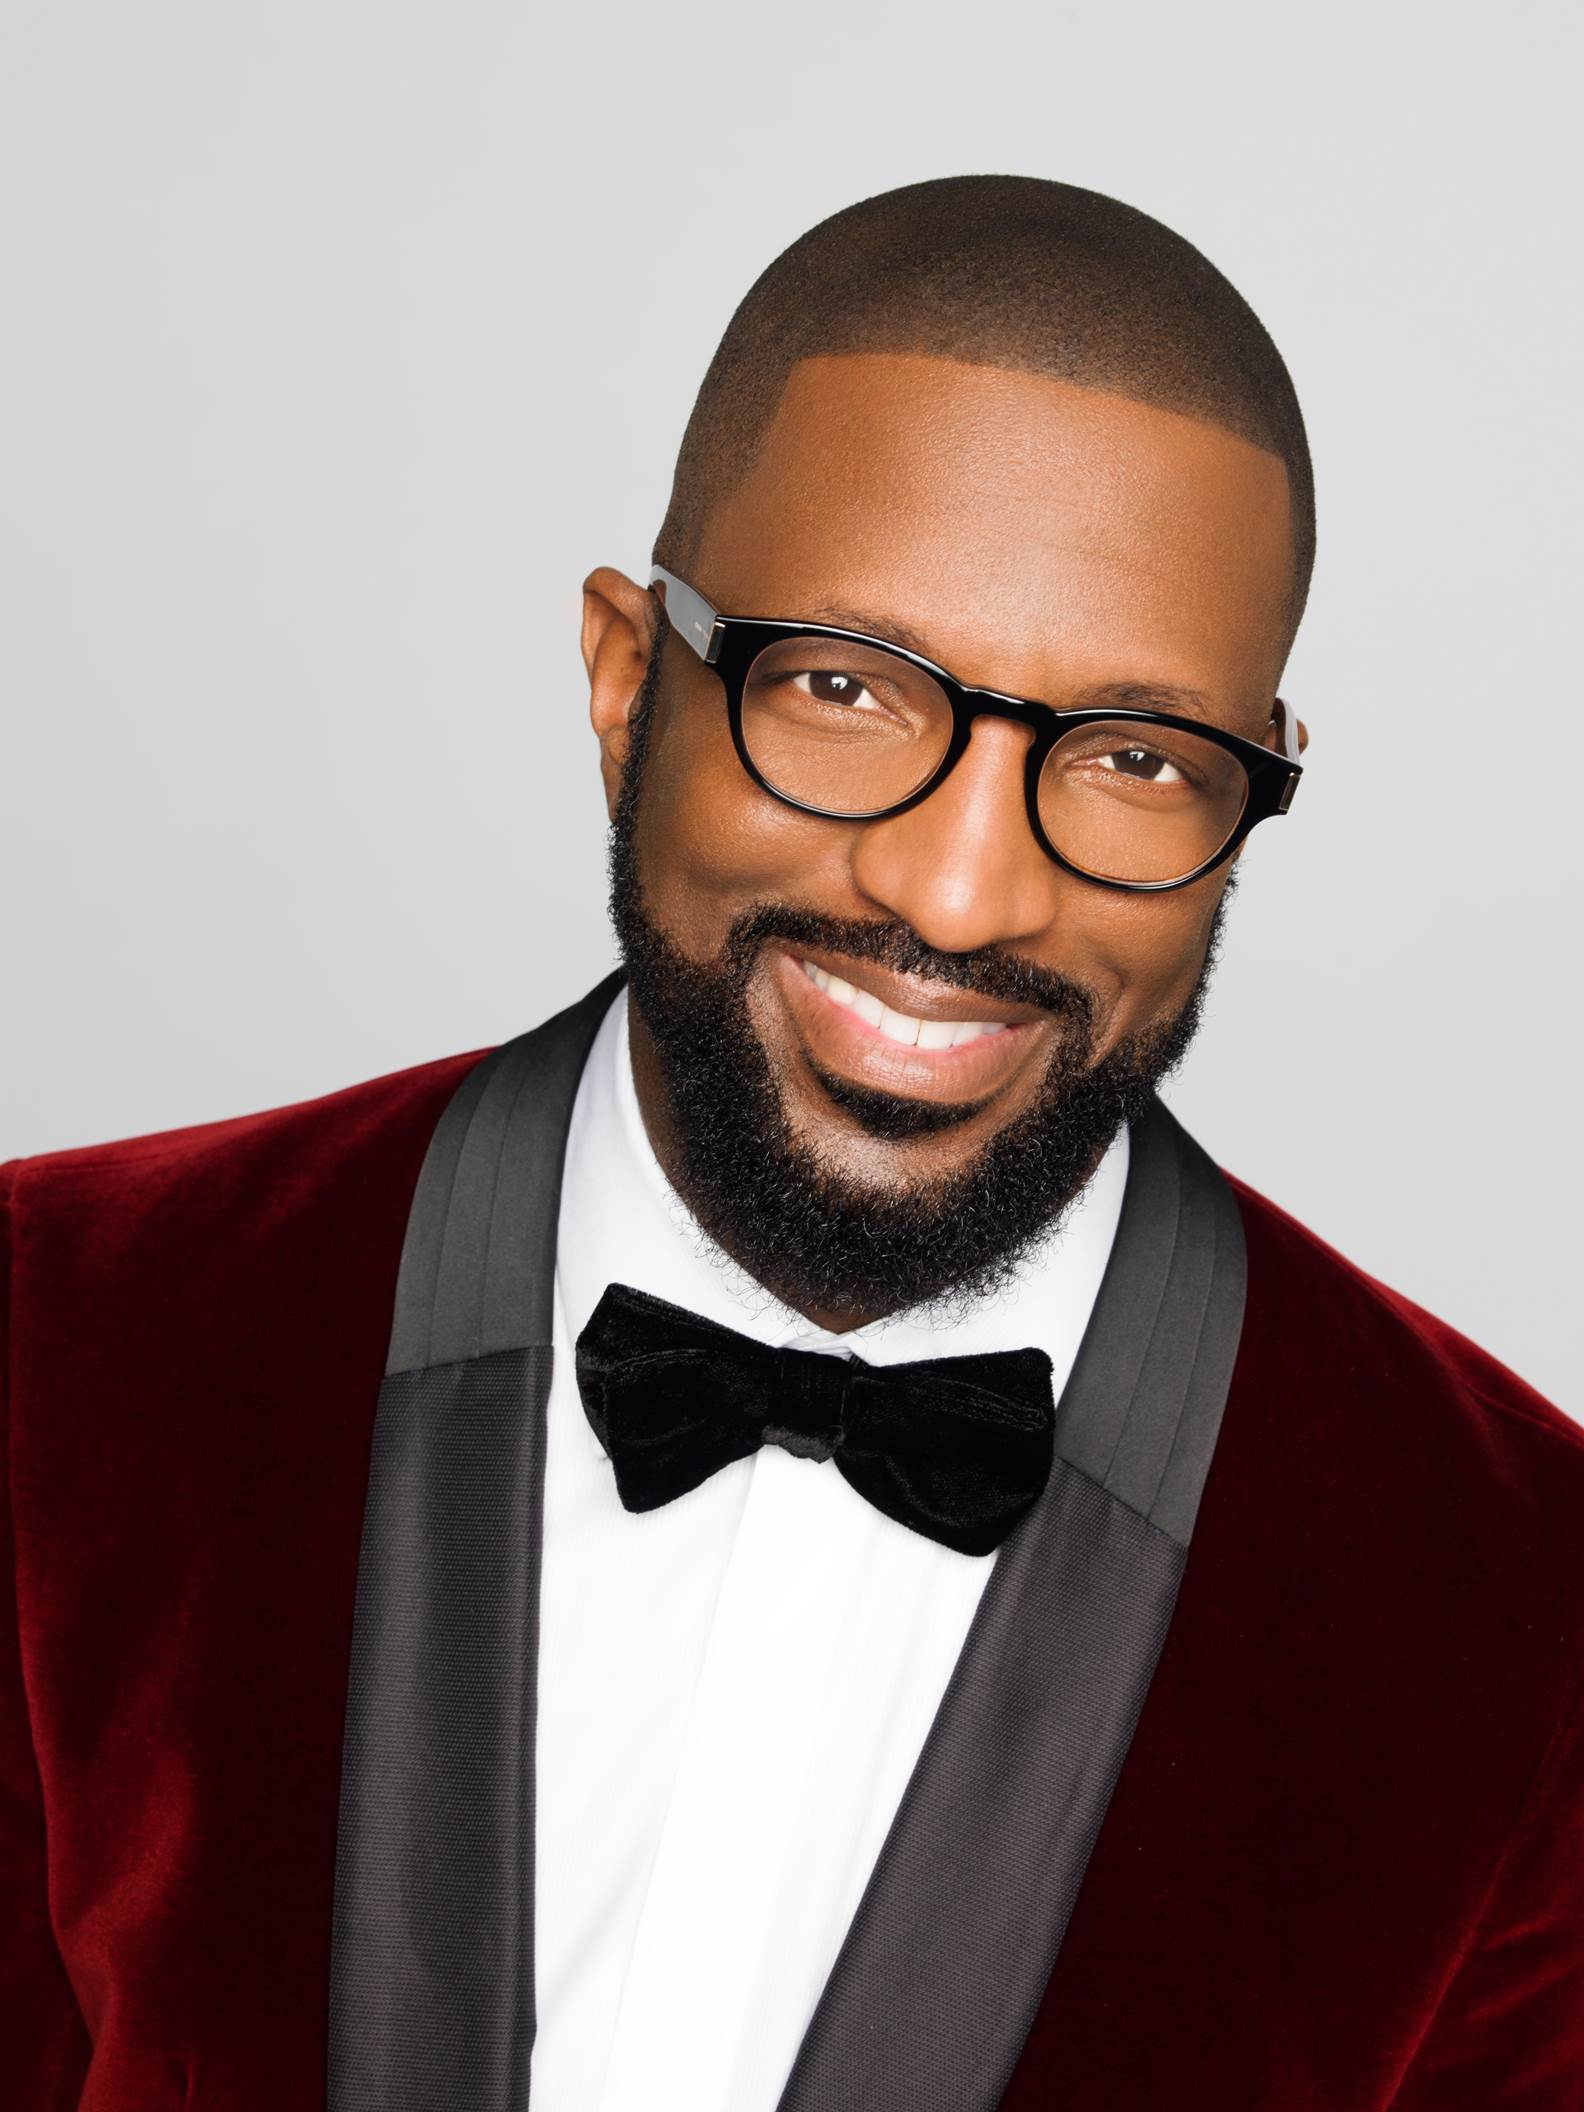 TV One's Rickey Smiley For Real Returns for a Fourth Season on Tuesday